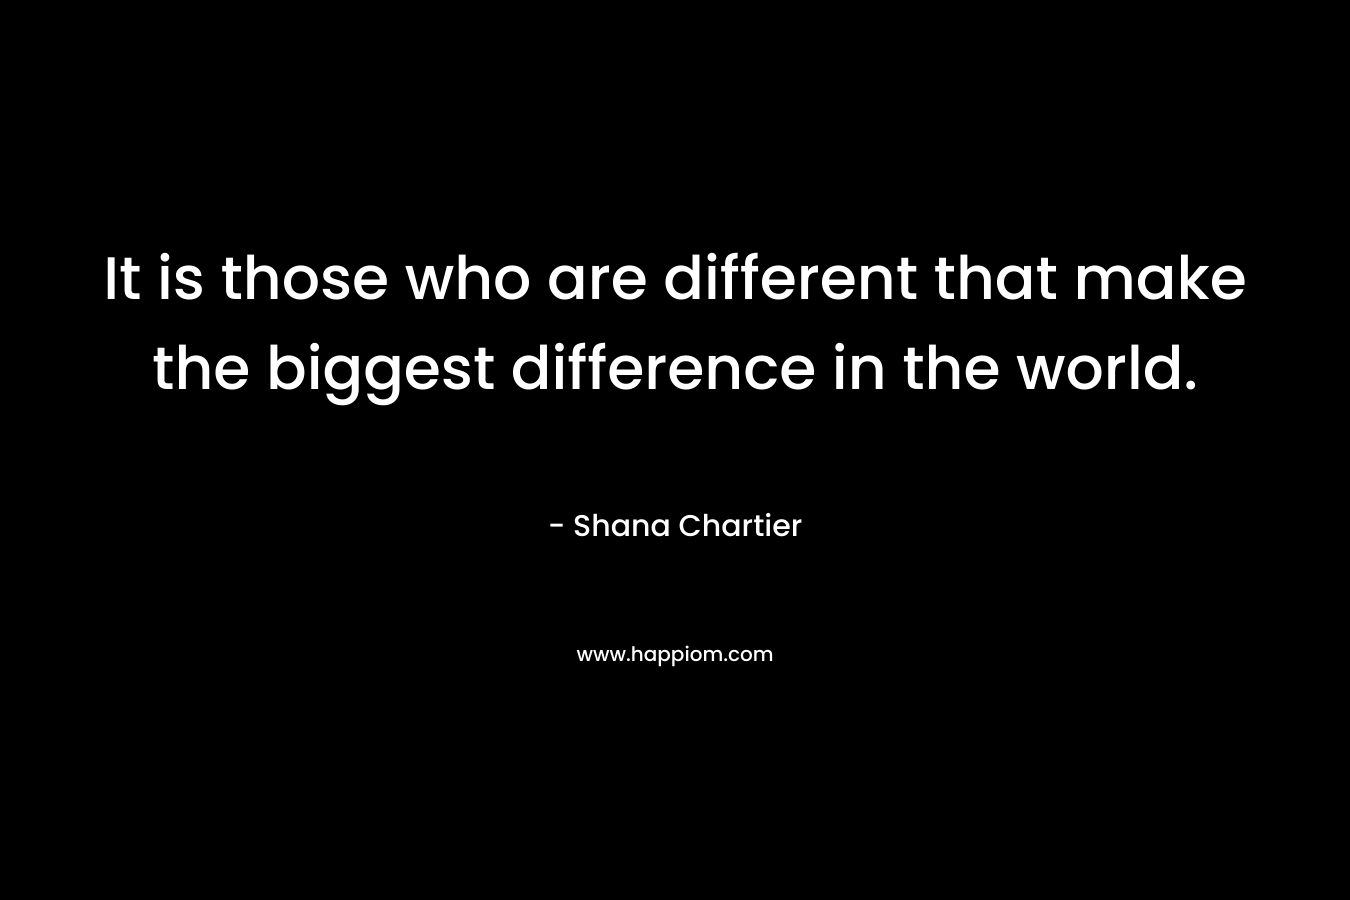 It is those who are different that make the biggest difference in the world.